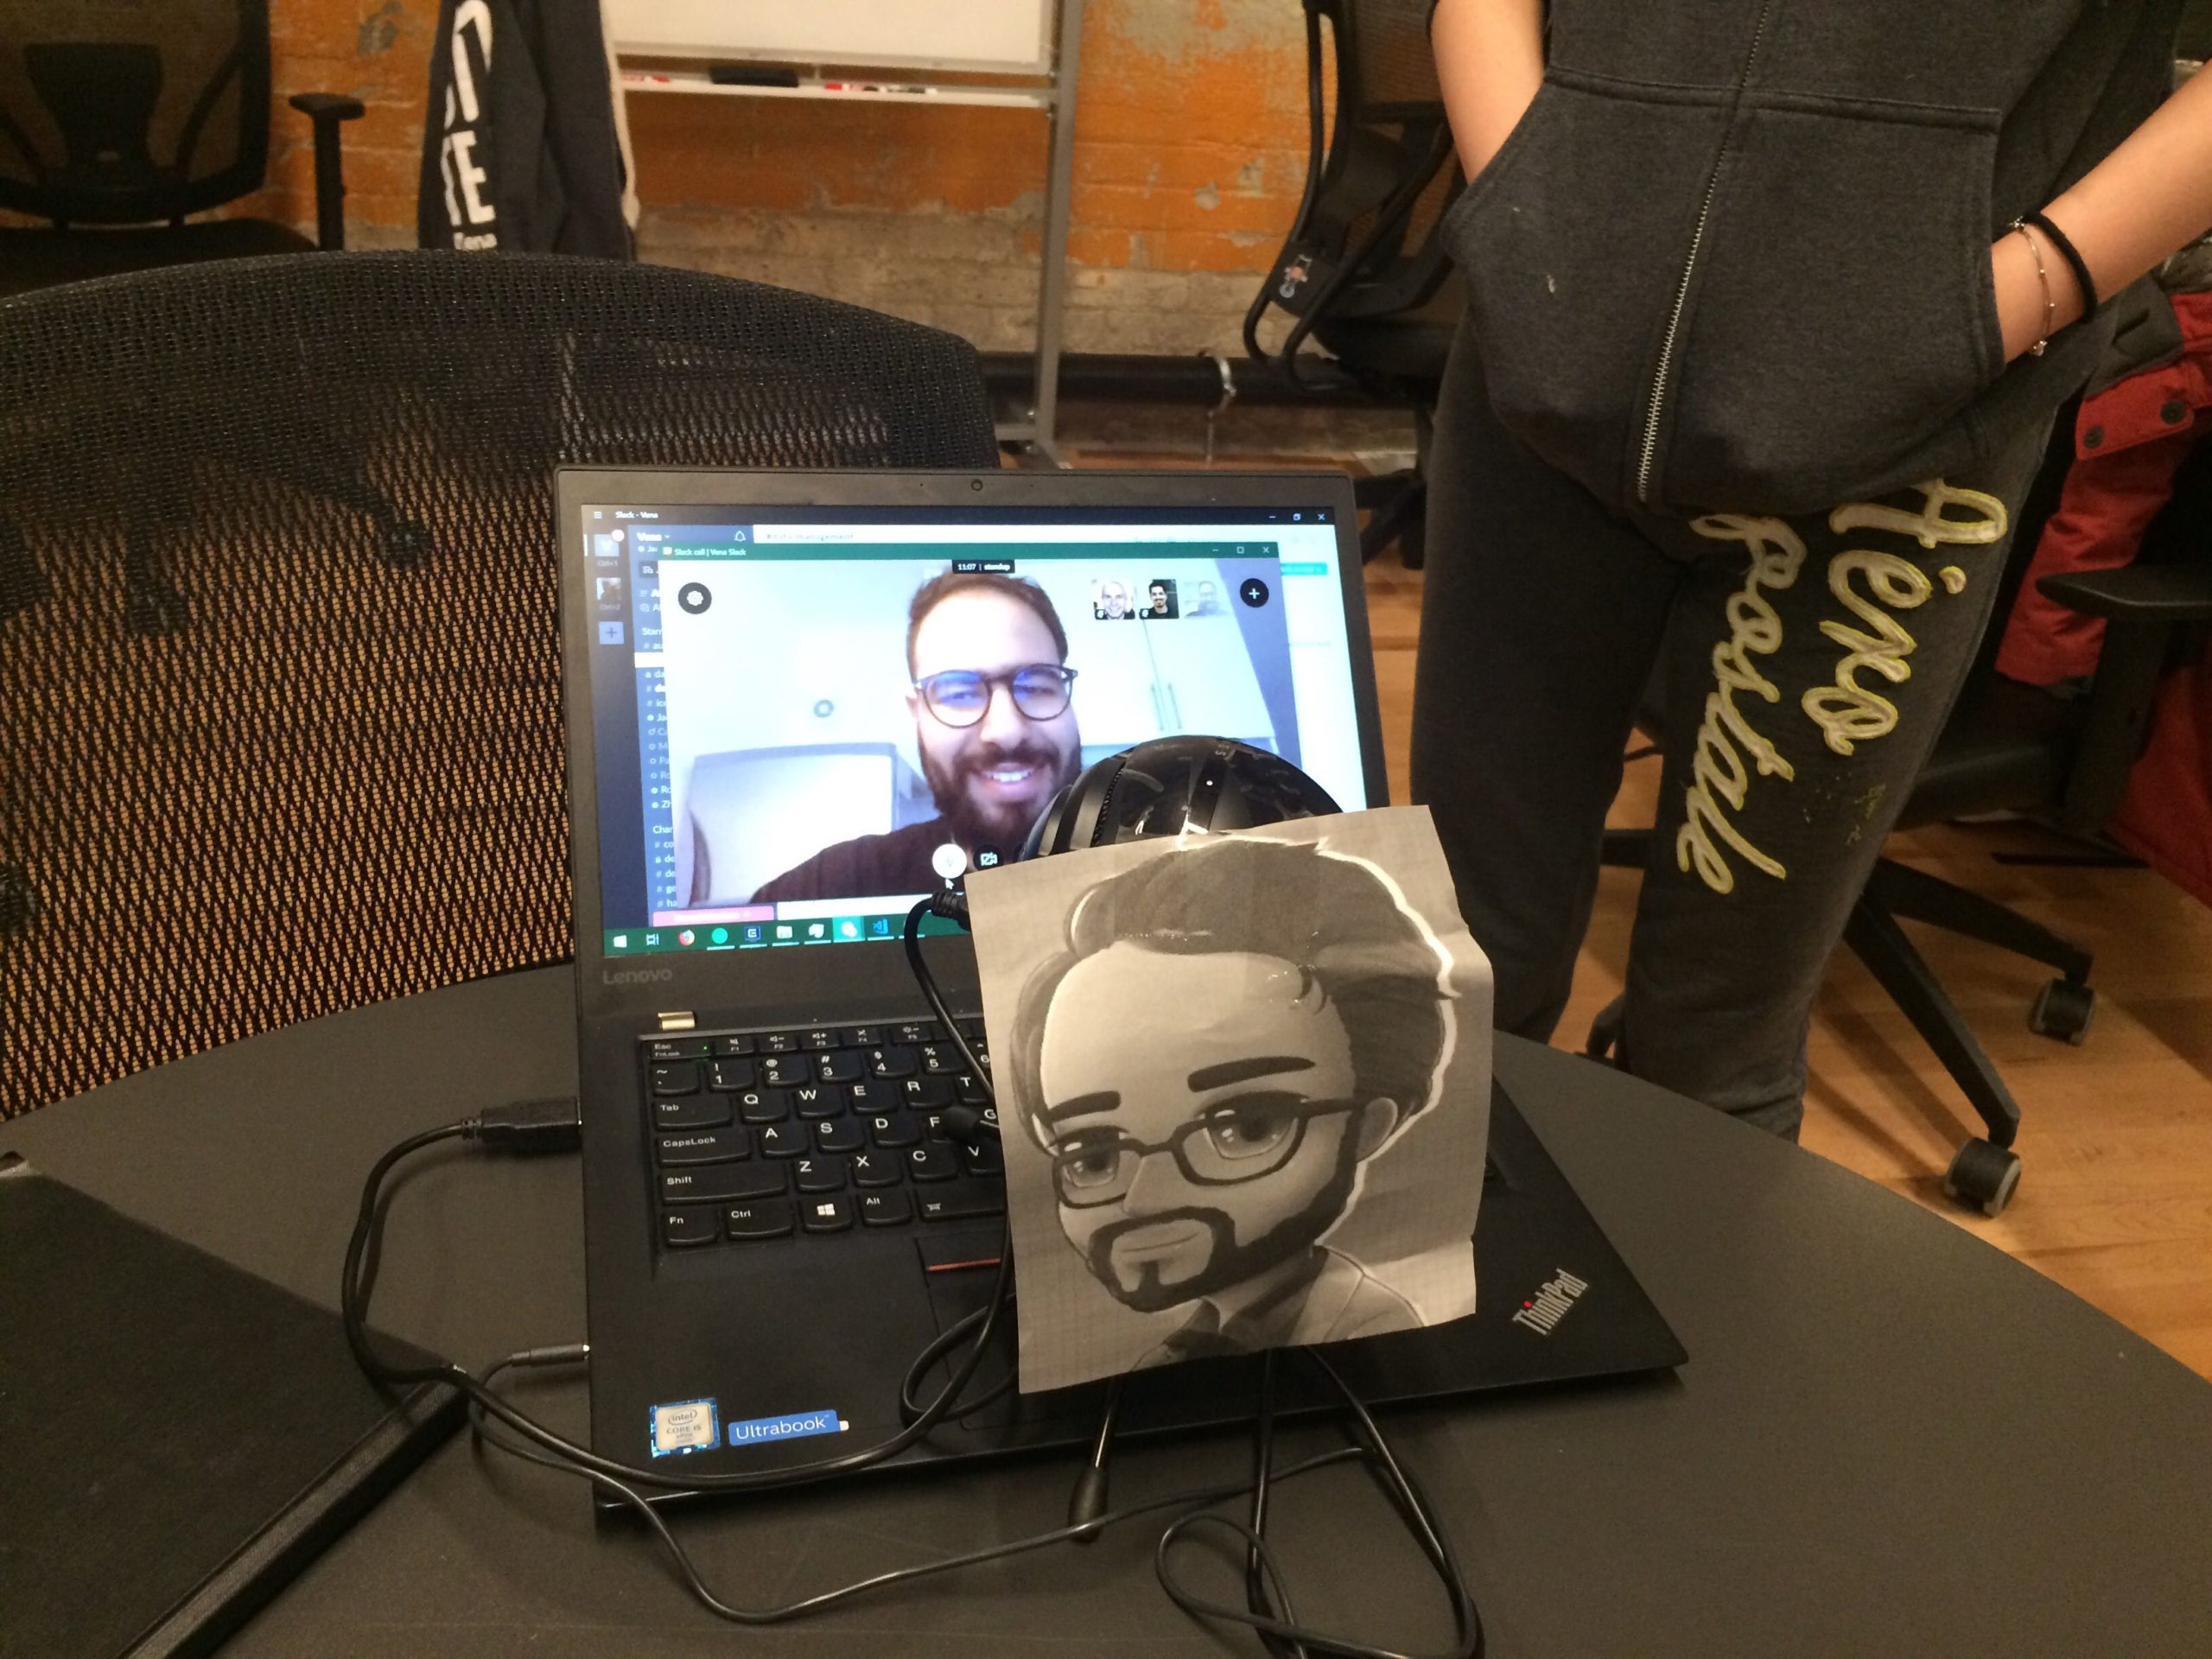 Mustafa doing a stand-up meeting remotely